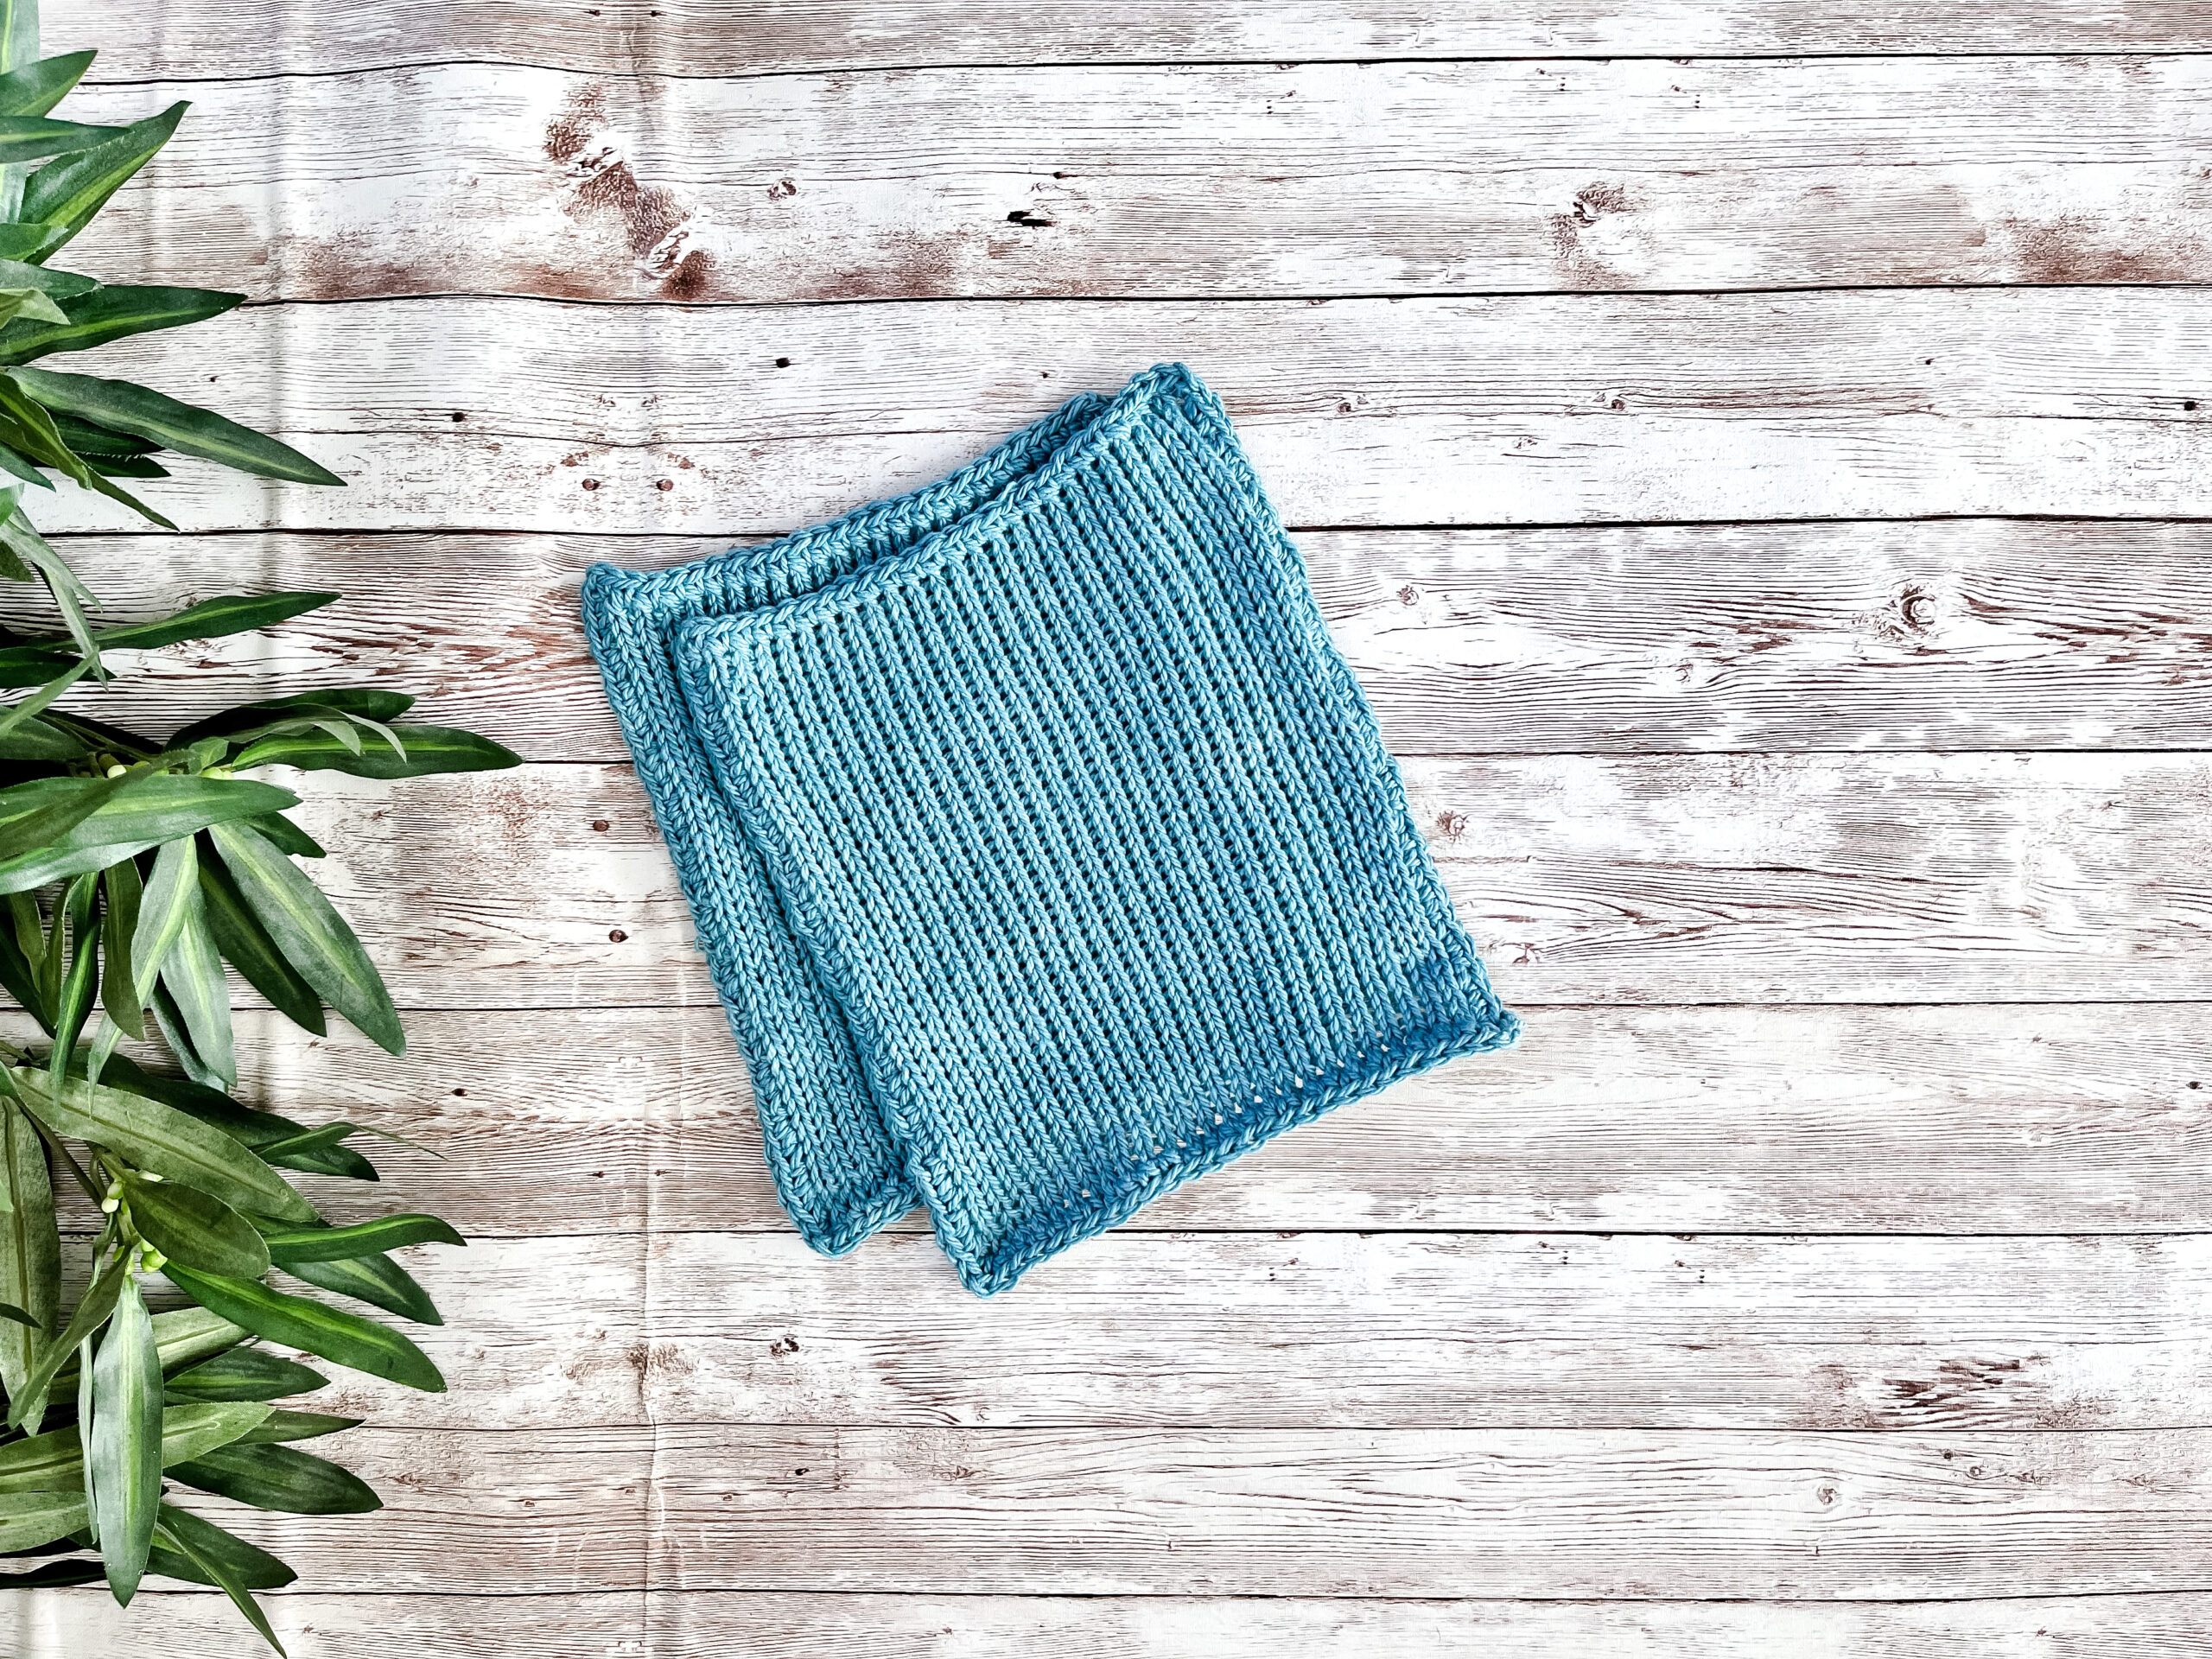 A pair of blue Virginia-grown cotton washcloths rests on a wood plank with greenery on the left border